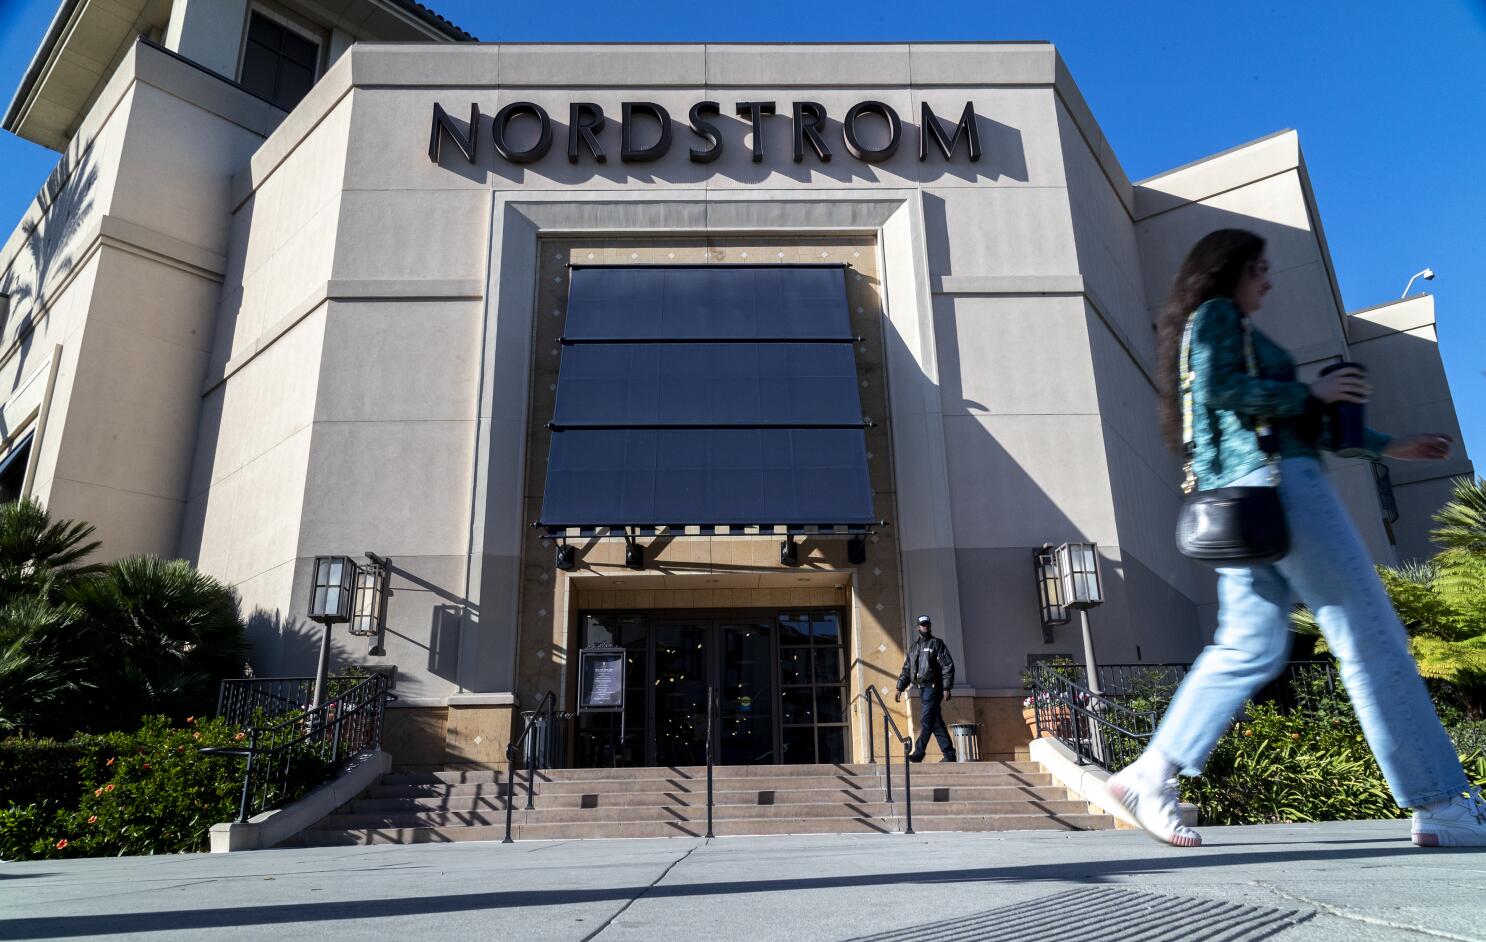 3 Arrested Following Retail Theft at Nordstrom Store in Walnut